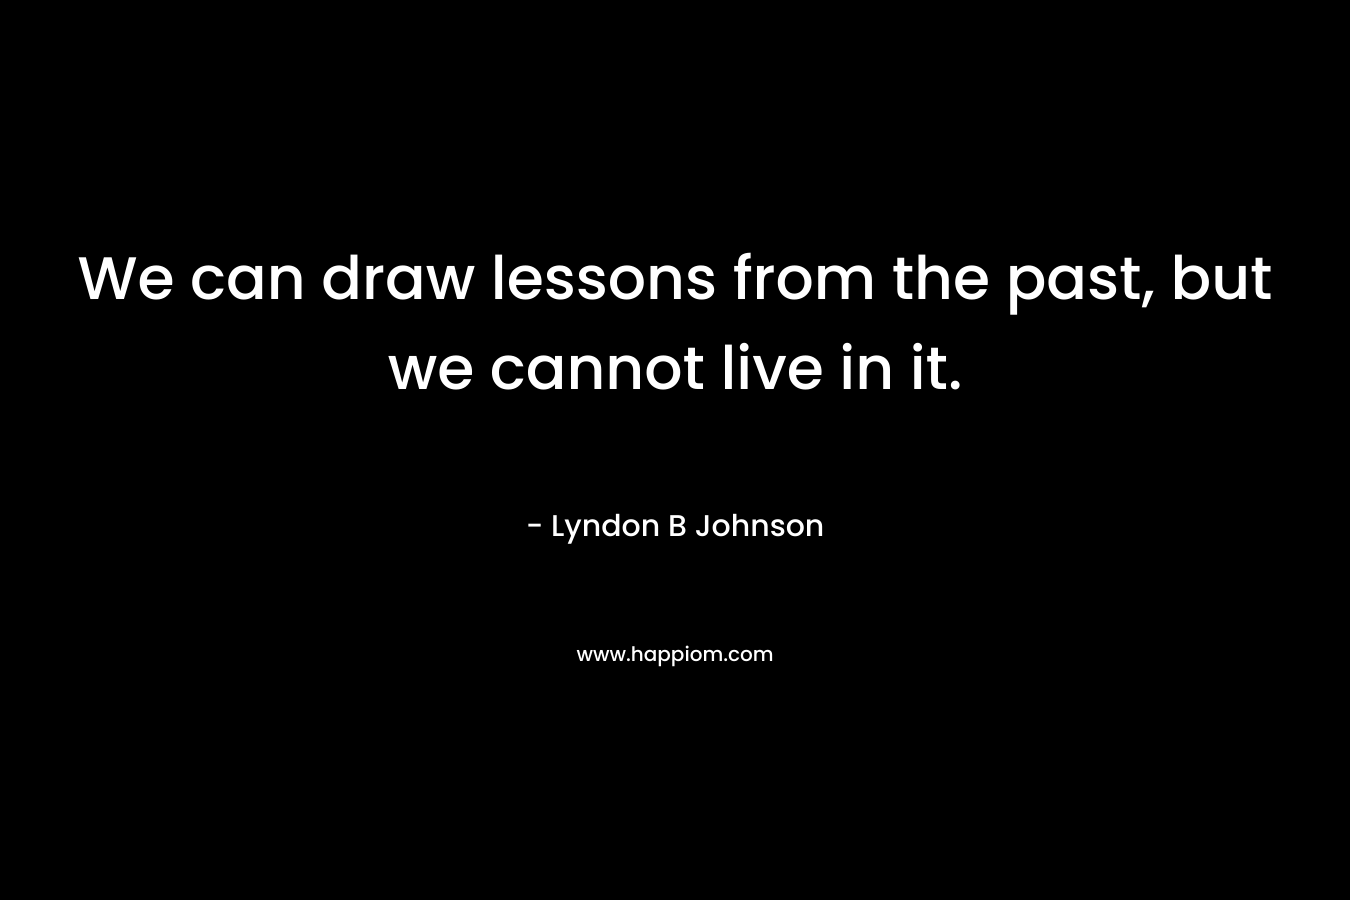 We can draw lessons from the past, but we cannot live in it. – Lyndon B Johnson